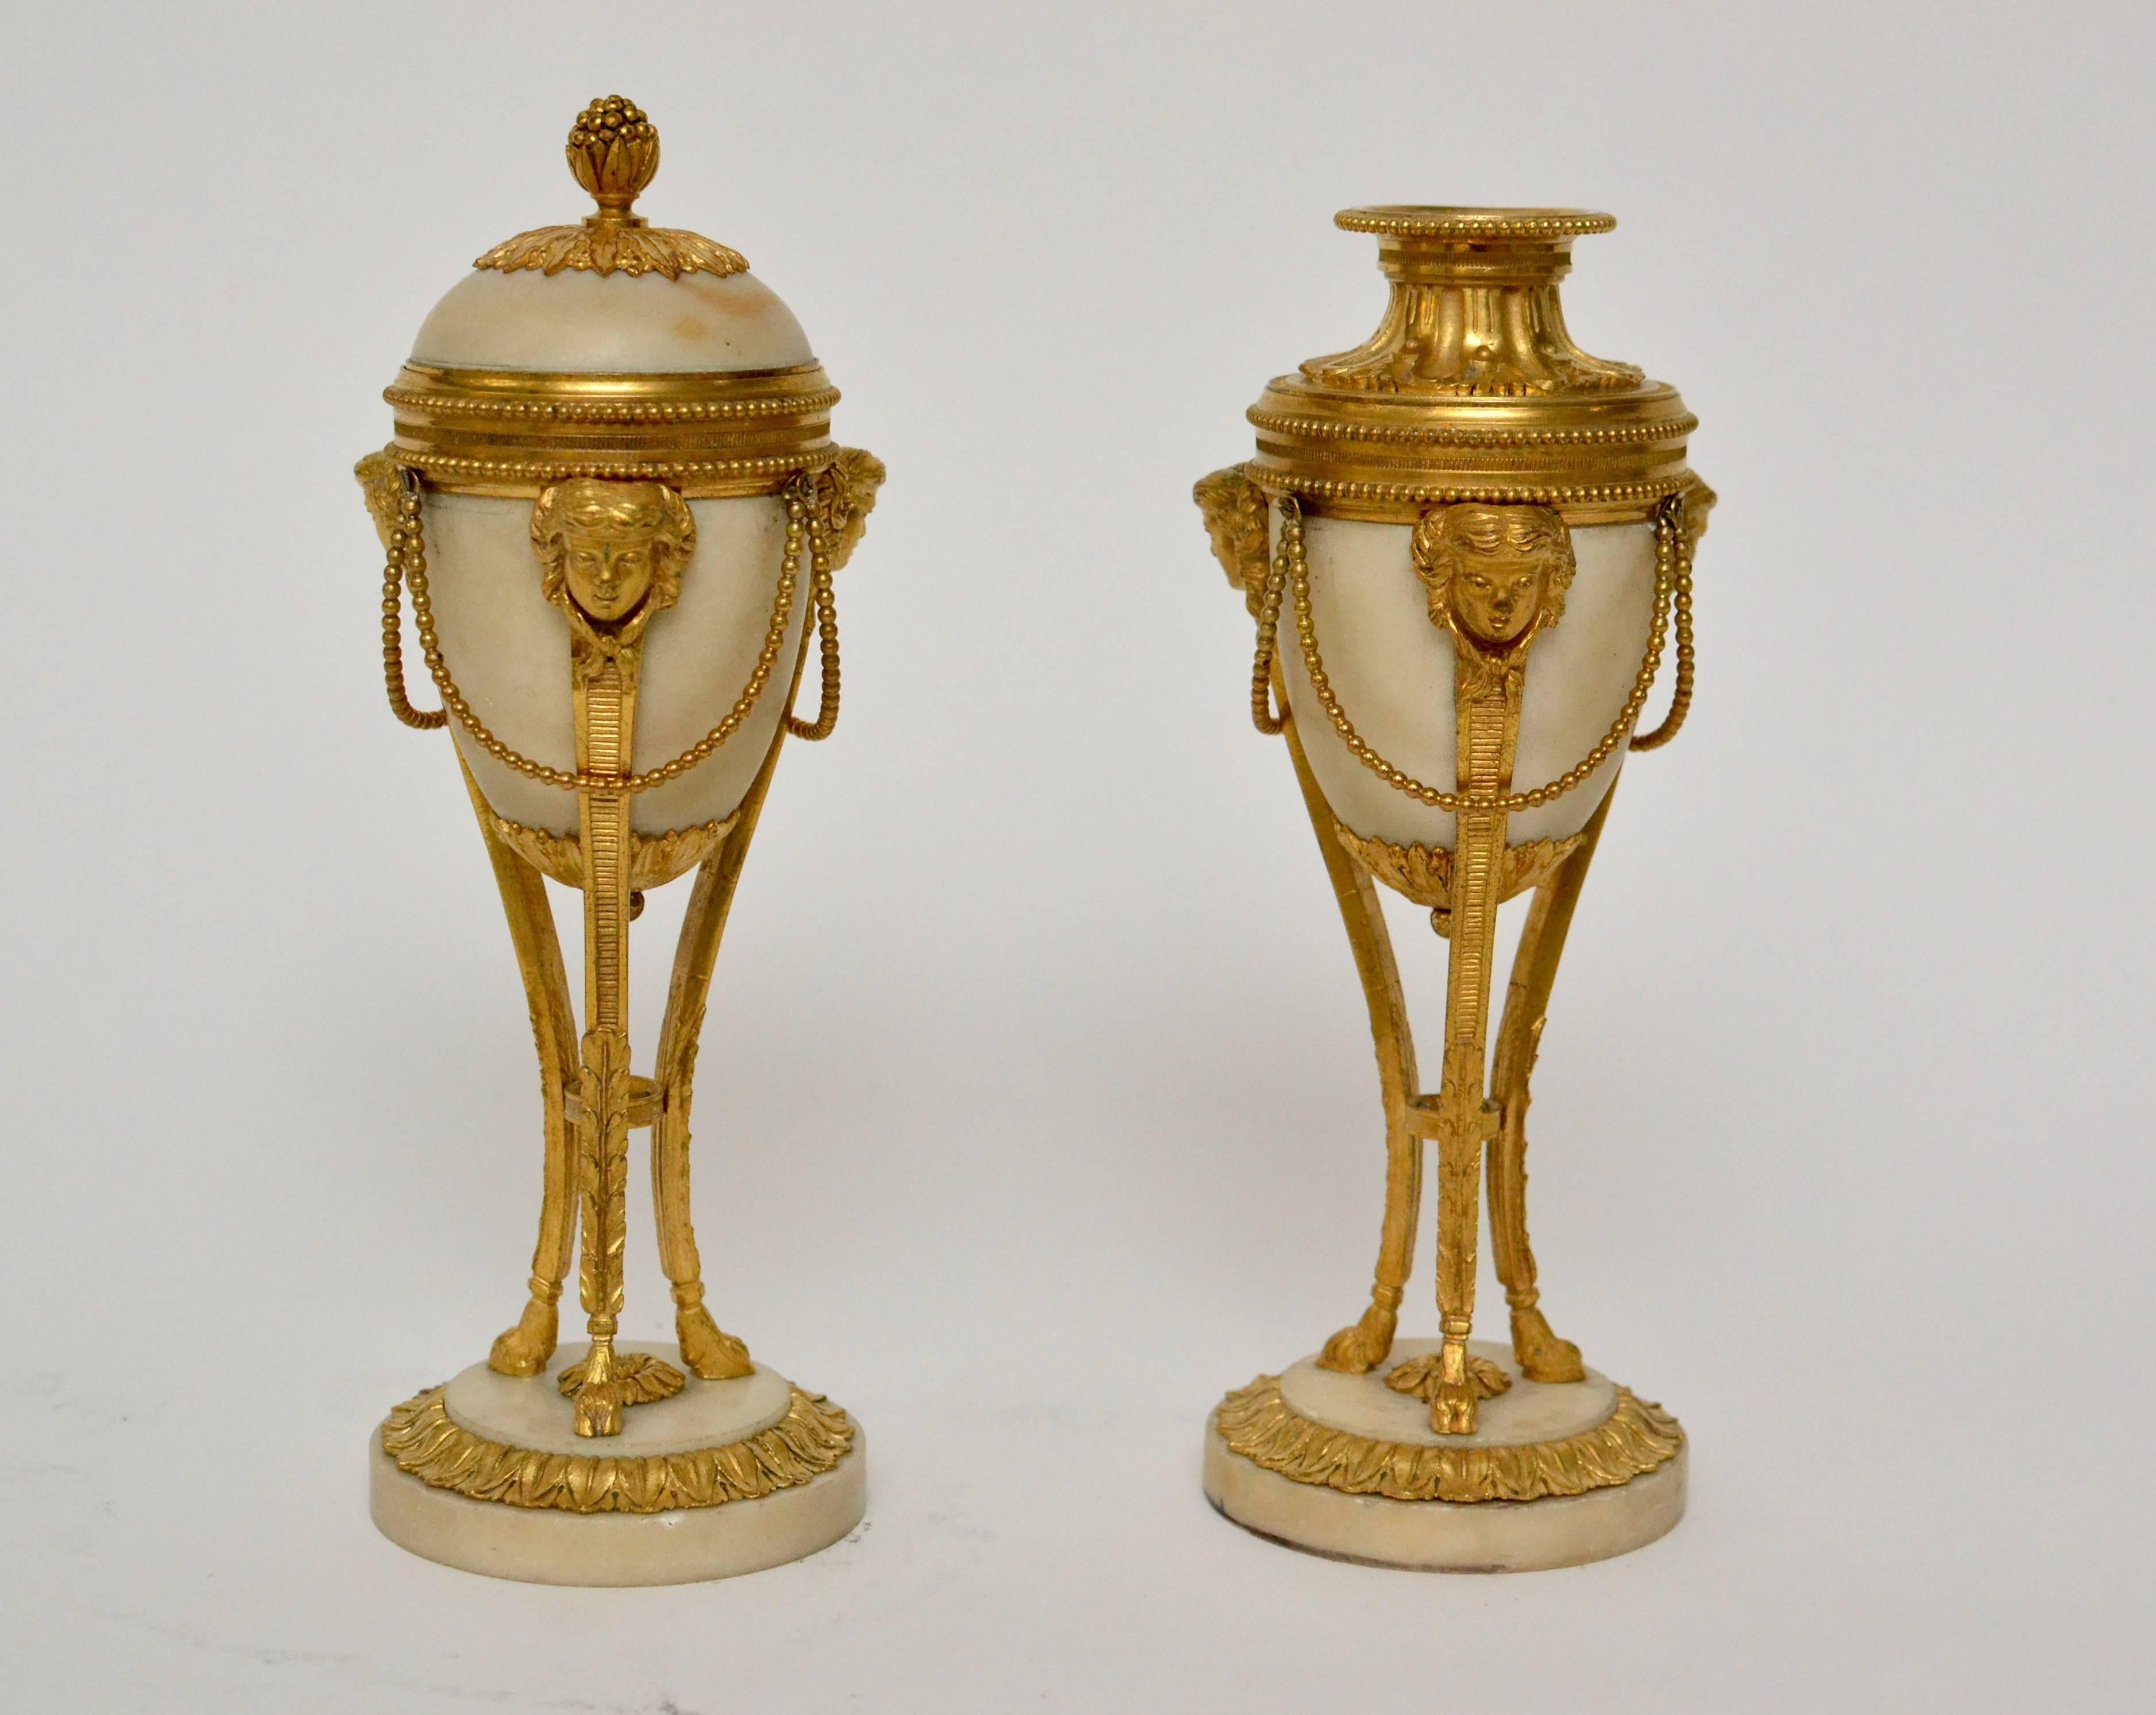 Pair of gilt bronze and white marble Louis XVI cassolettes, late 18th century.